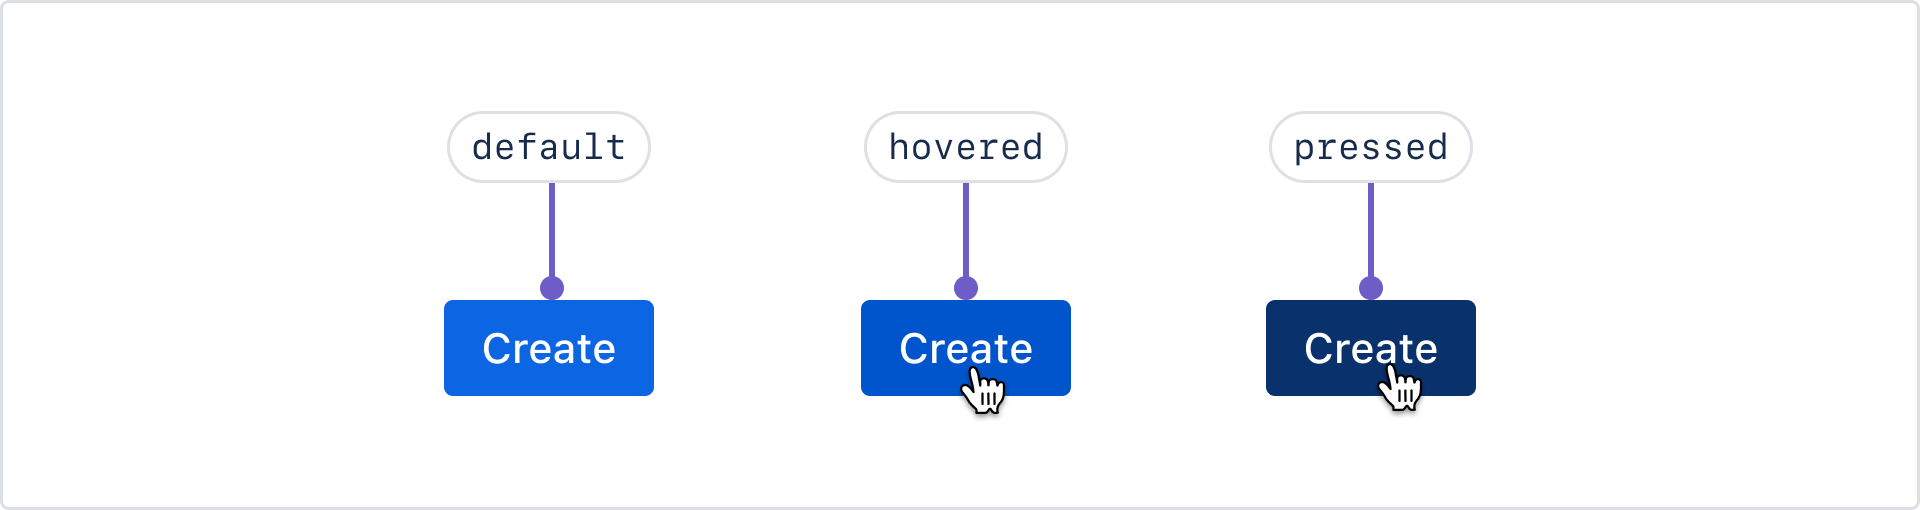 Button interaction states, which include default, hovered, and pressed states.